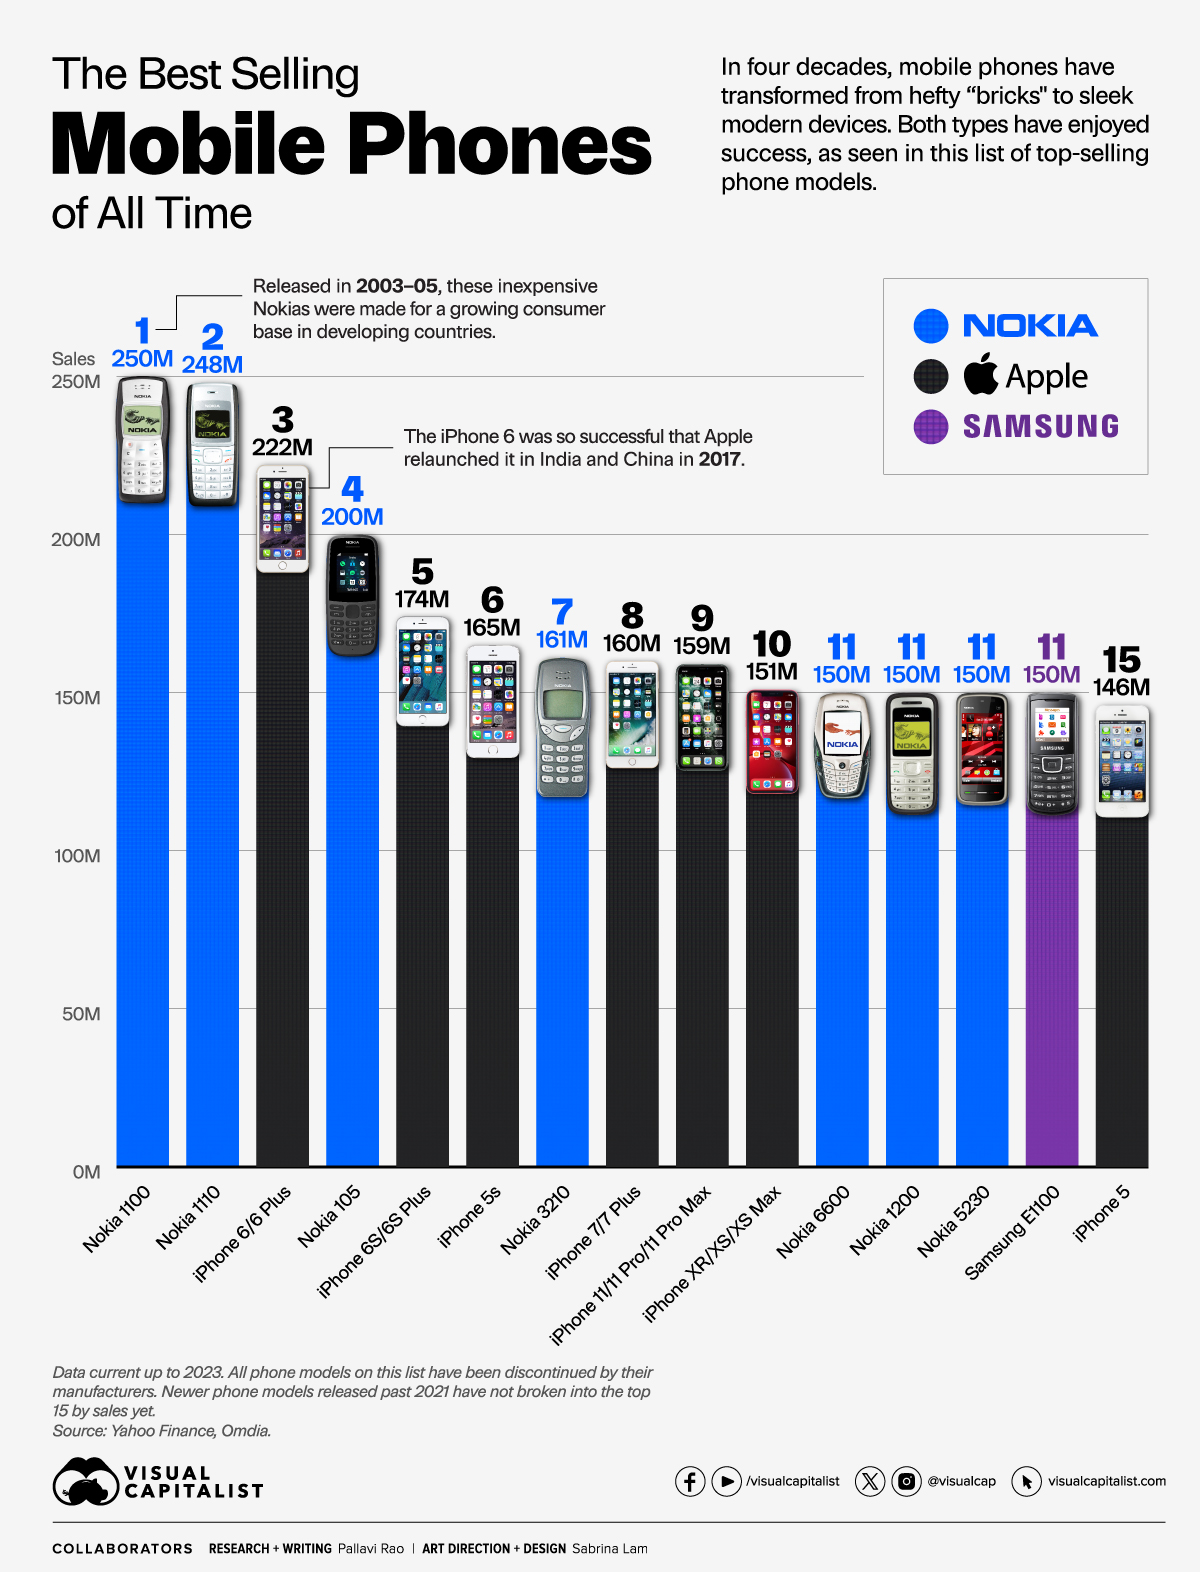 Charted: The Top 15 Most Sold Mobile Phones of All Time